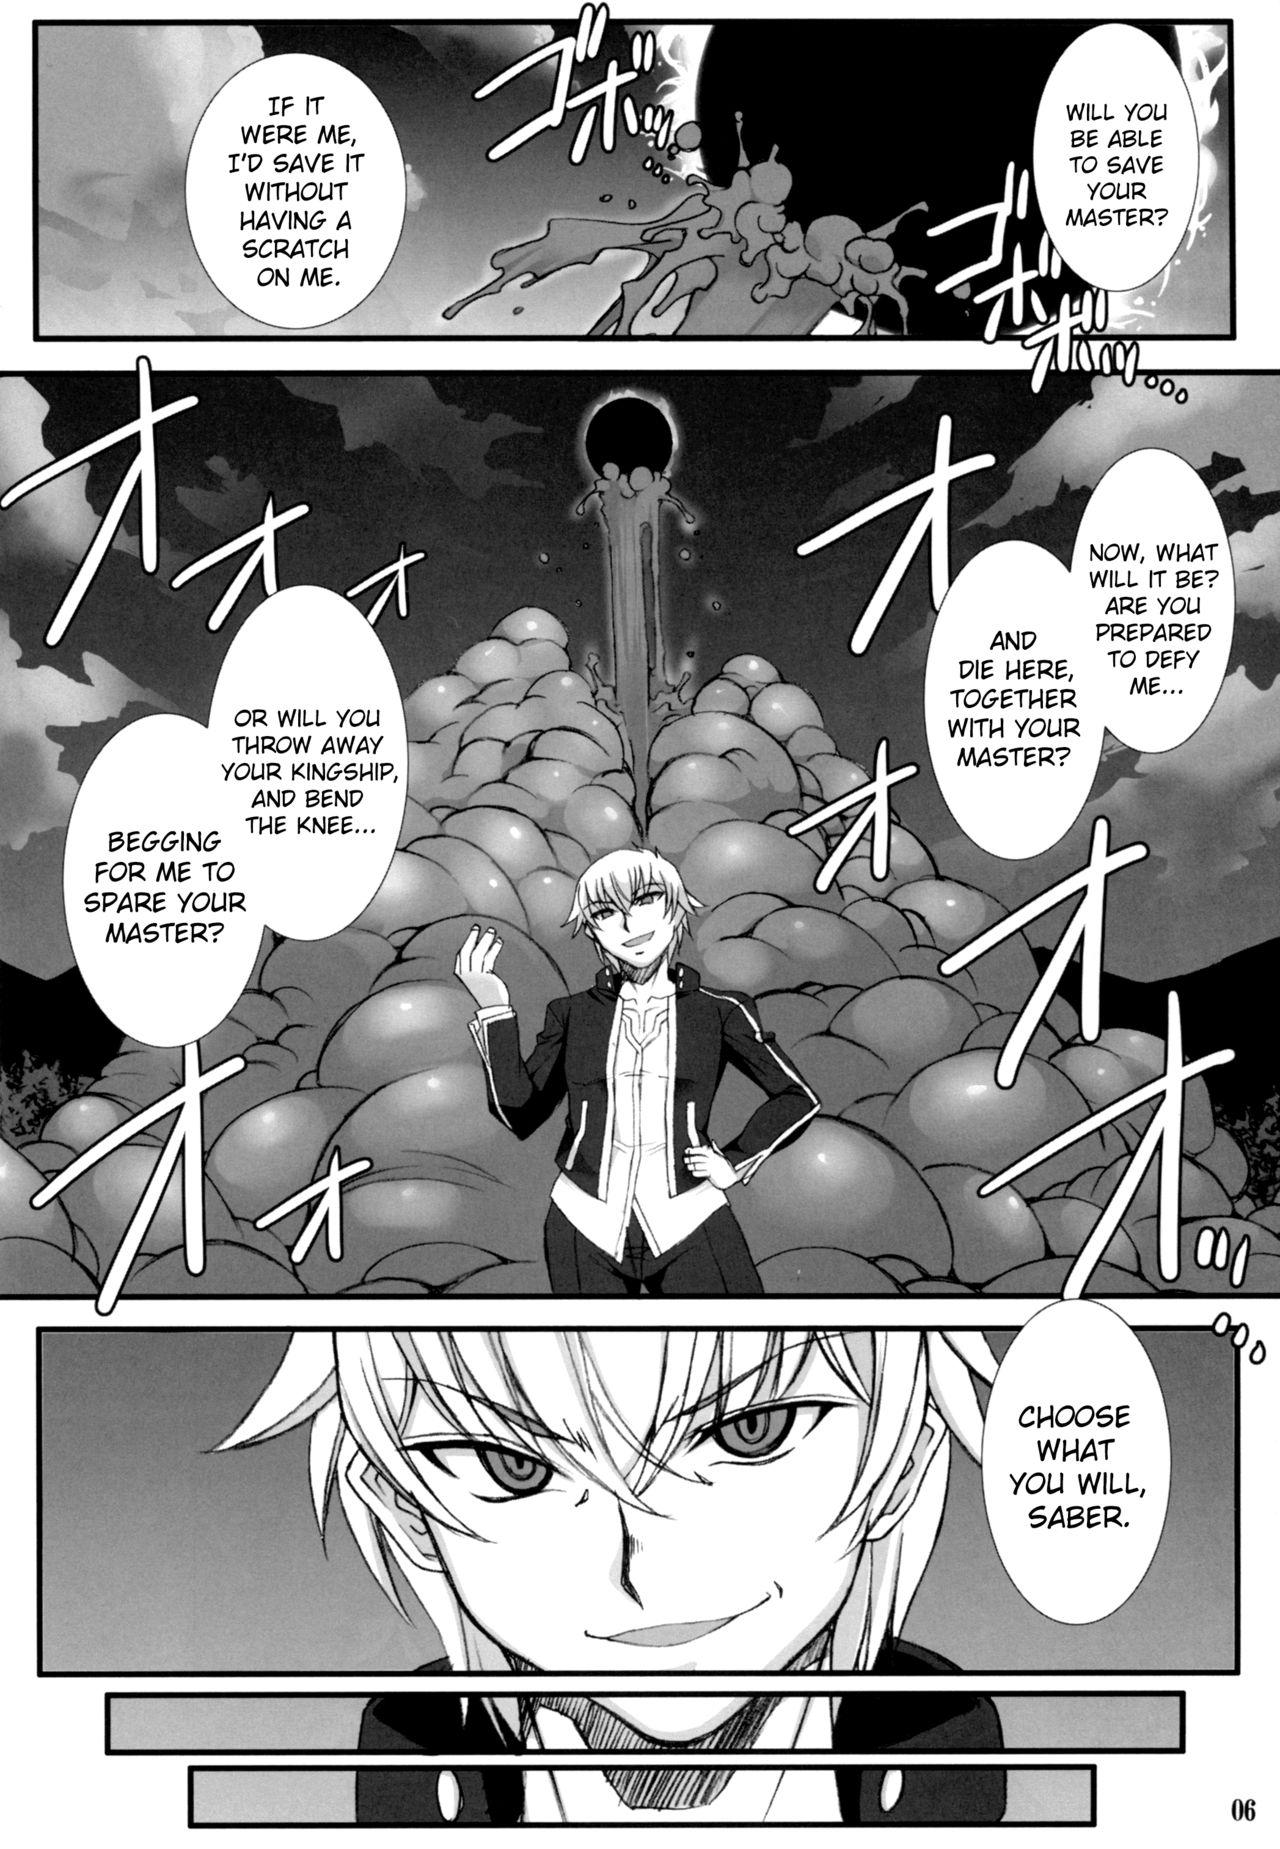 Fishnet (C88) [H.B (B-RIVER)] Rin Kai -Kegasareta Aka- | Rin Destruction -Stained Red- (Fate/stay night) [English] [ChoriScans] - Fate stay night Roludo - Page 6